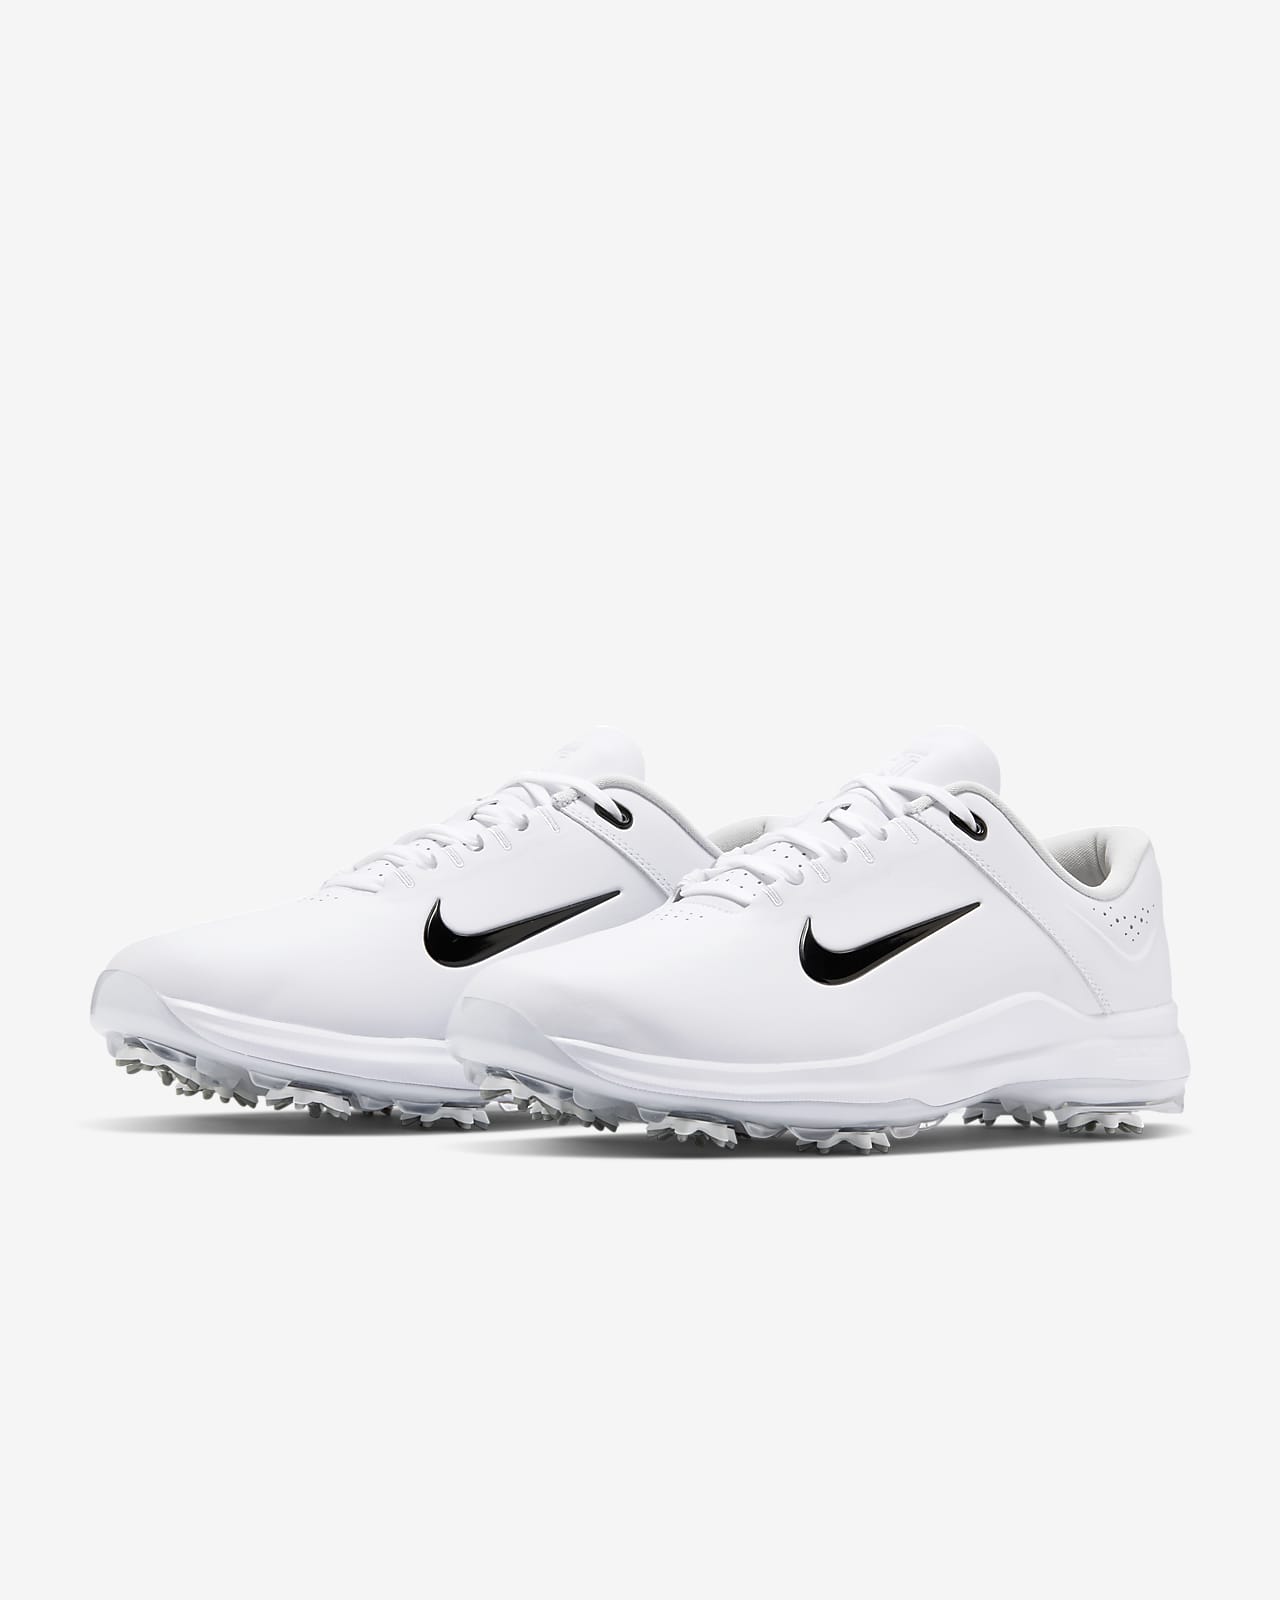 wide nike golf shoes